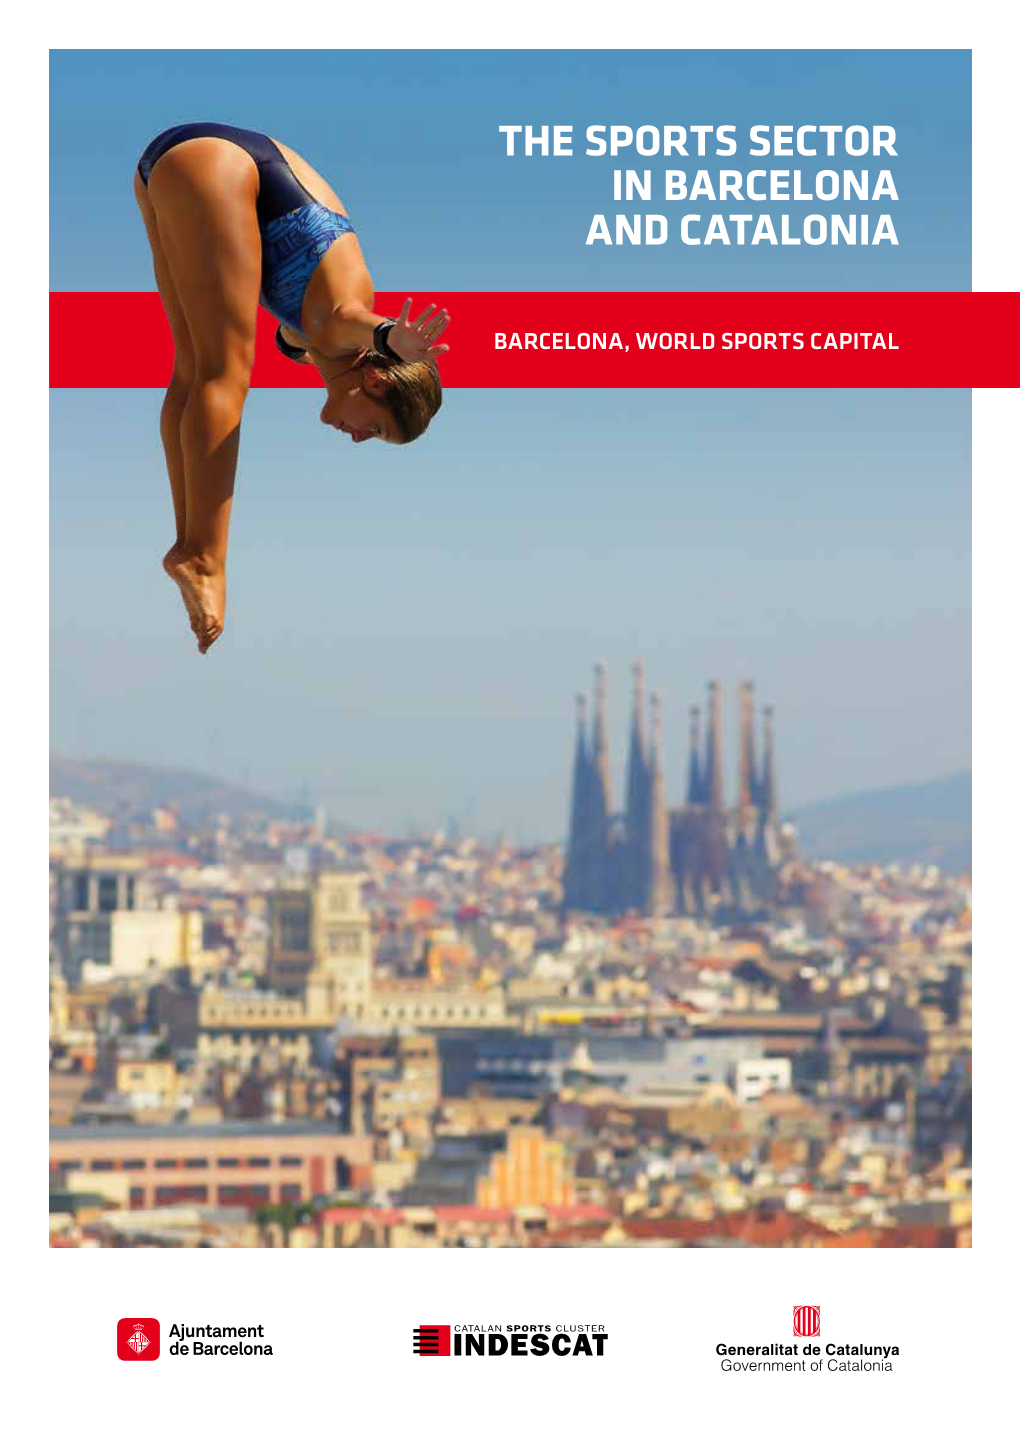 The Sports Sector in Barcelona and Catalonia